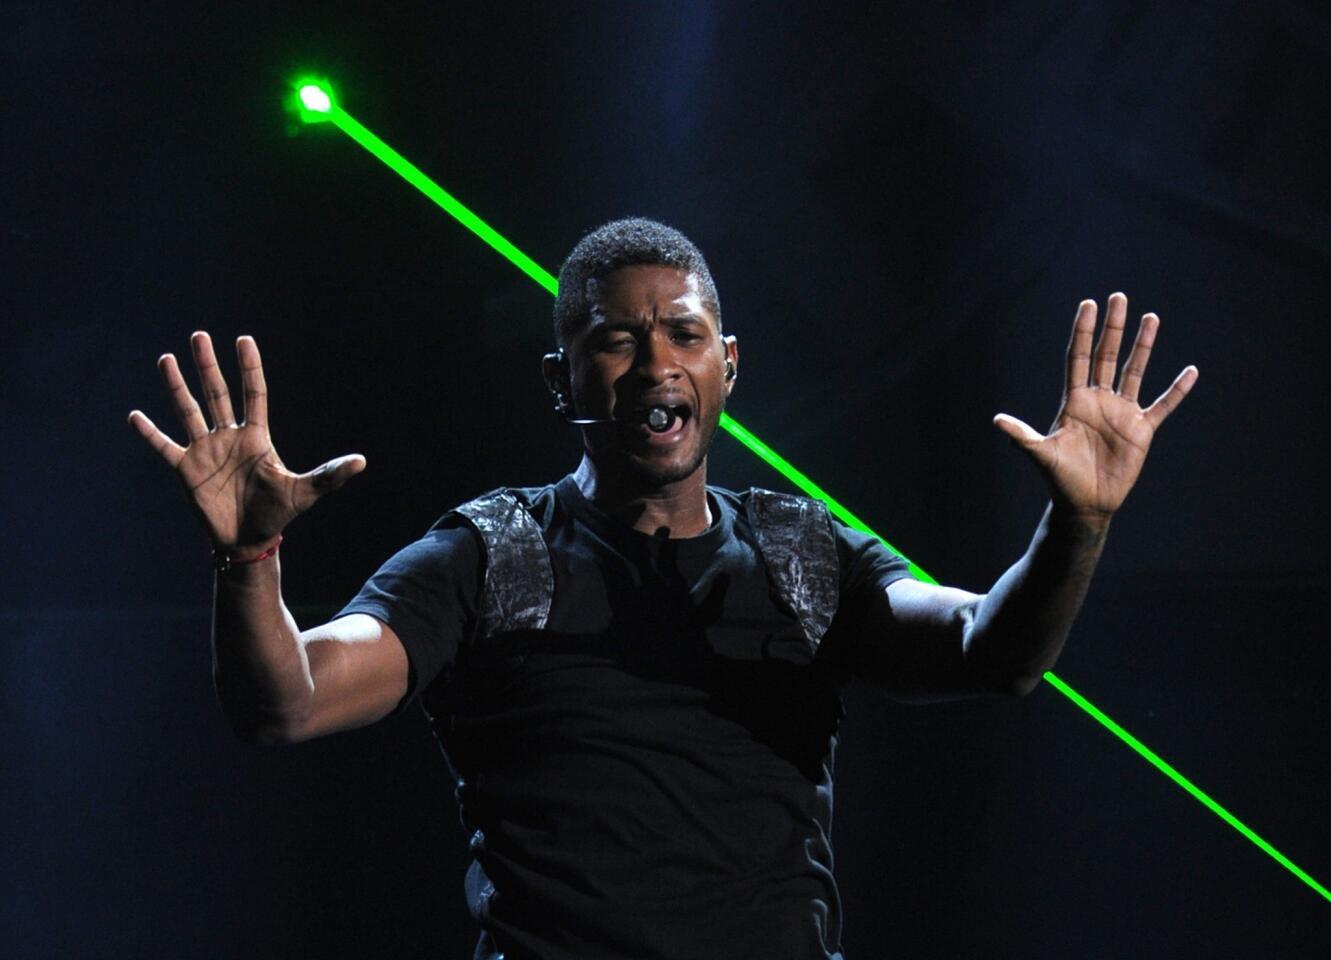 Usher kicked off the 2012 American Music Awards' 40th-anniversary show by performing a medley of his popular songs at the Nokia Theatre in Los Angeles on Sunday, Nov. 18.